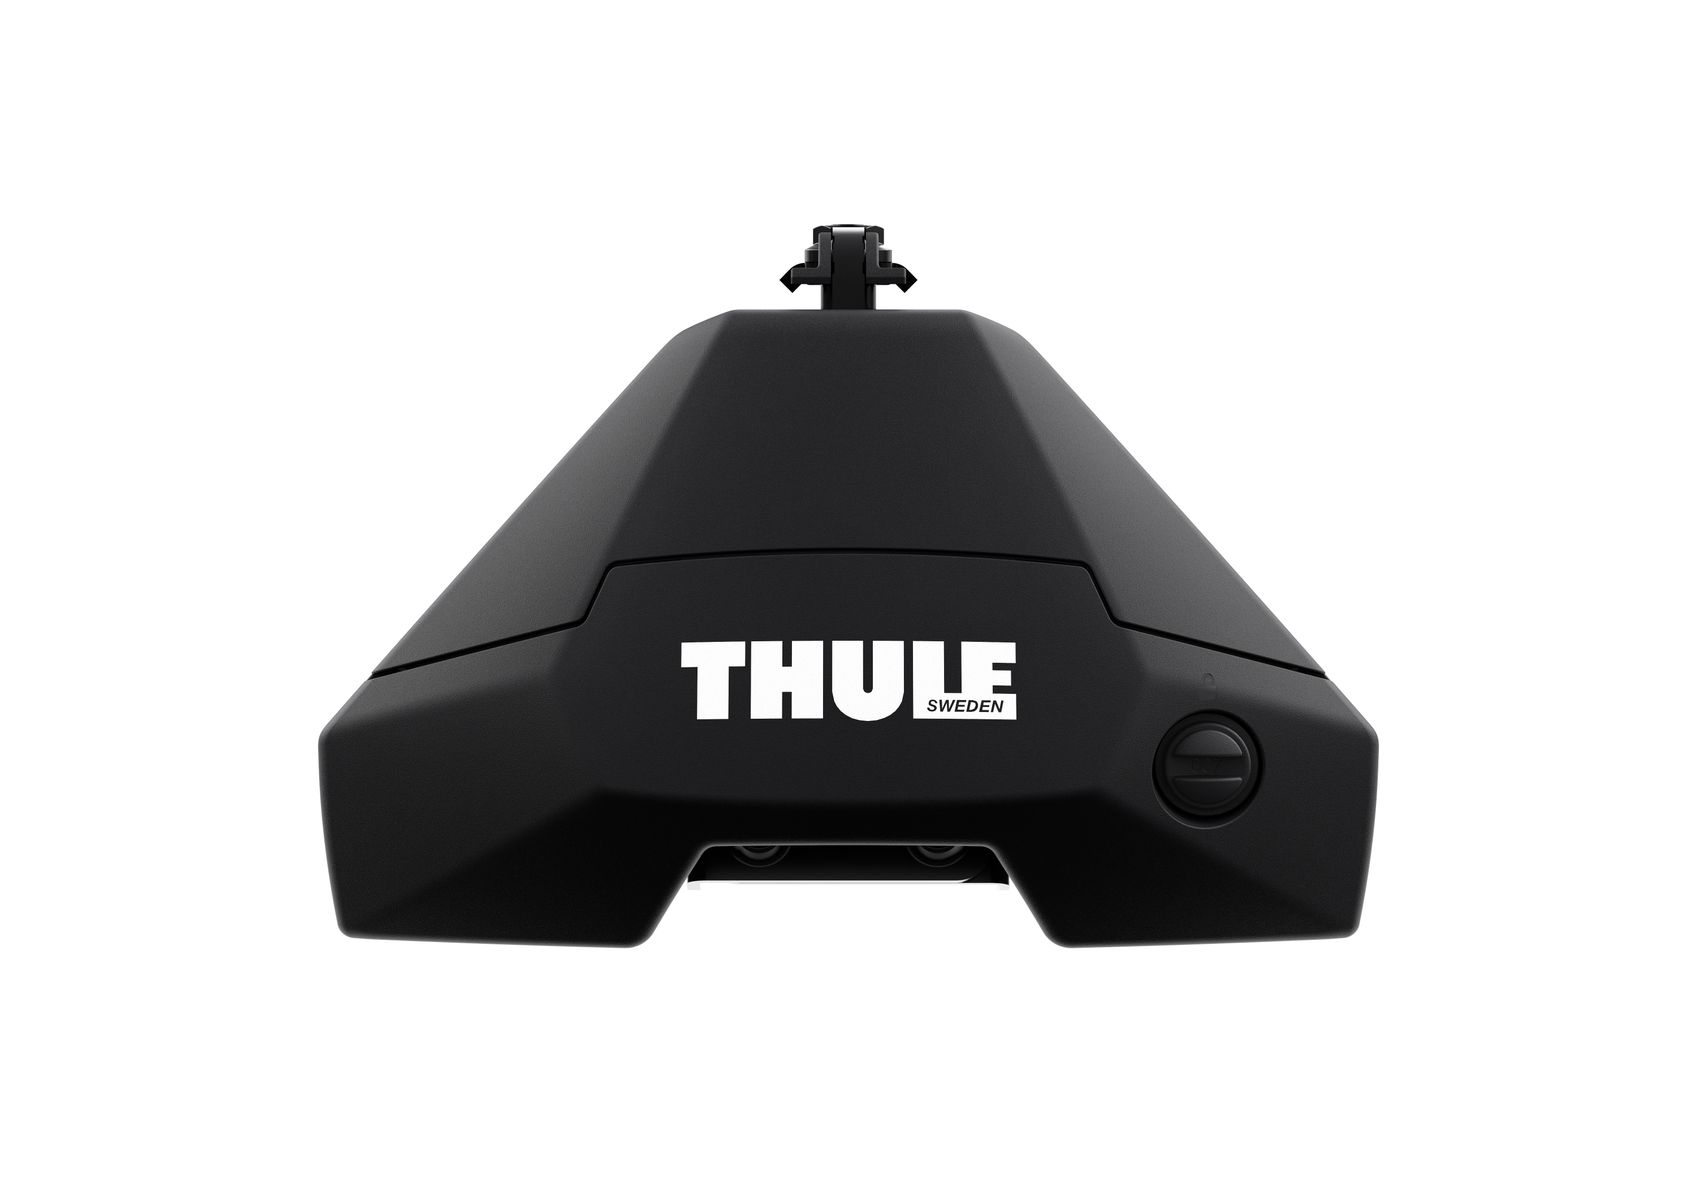 Thule C2 Clamp-Ons Connect Thule Accessories to Existing Bars 1" x 3 1/2" NEW 